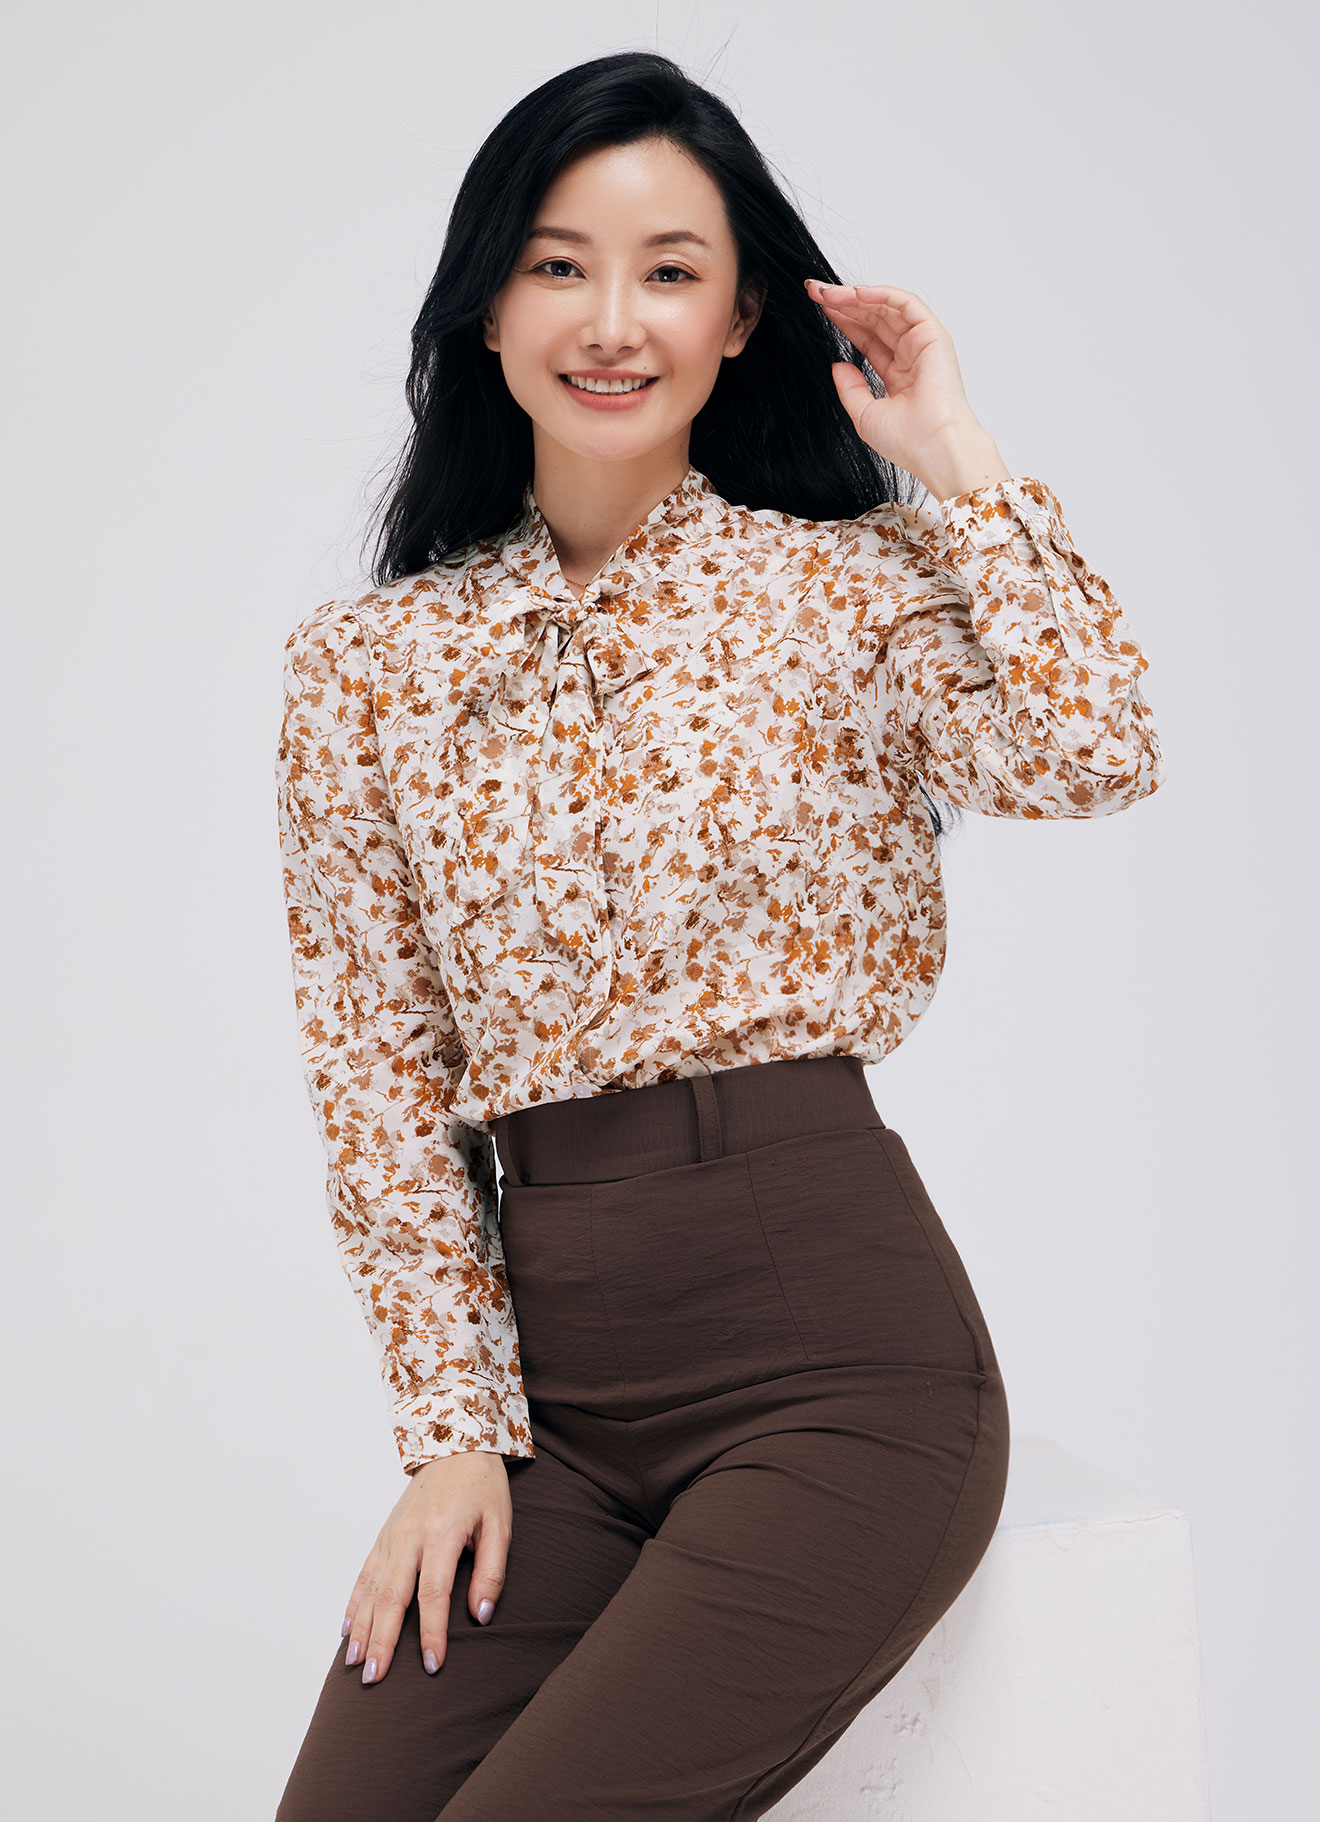 Mocha-Mousse  by Floral Printed Blouse